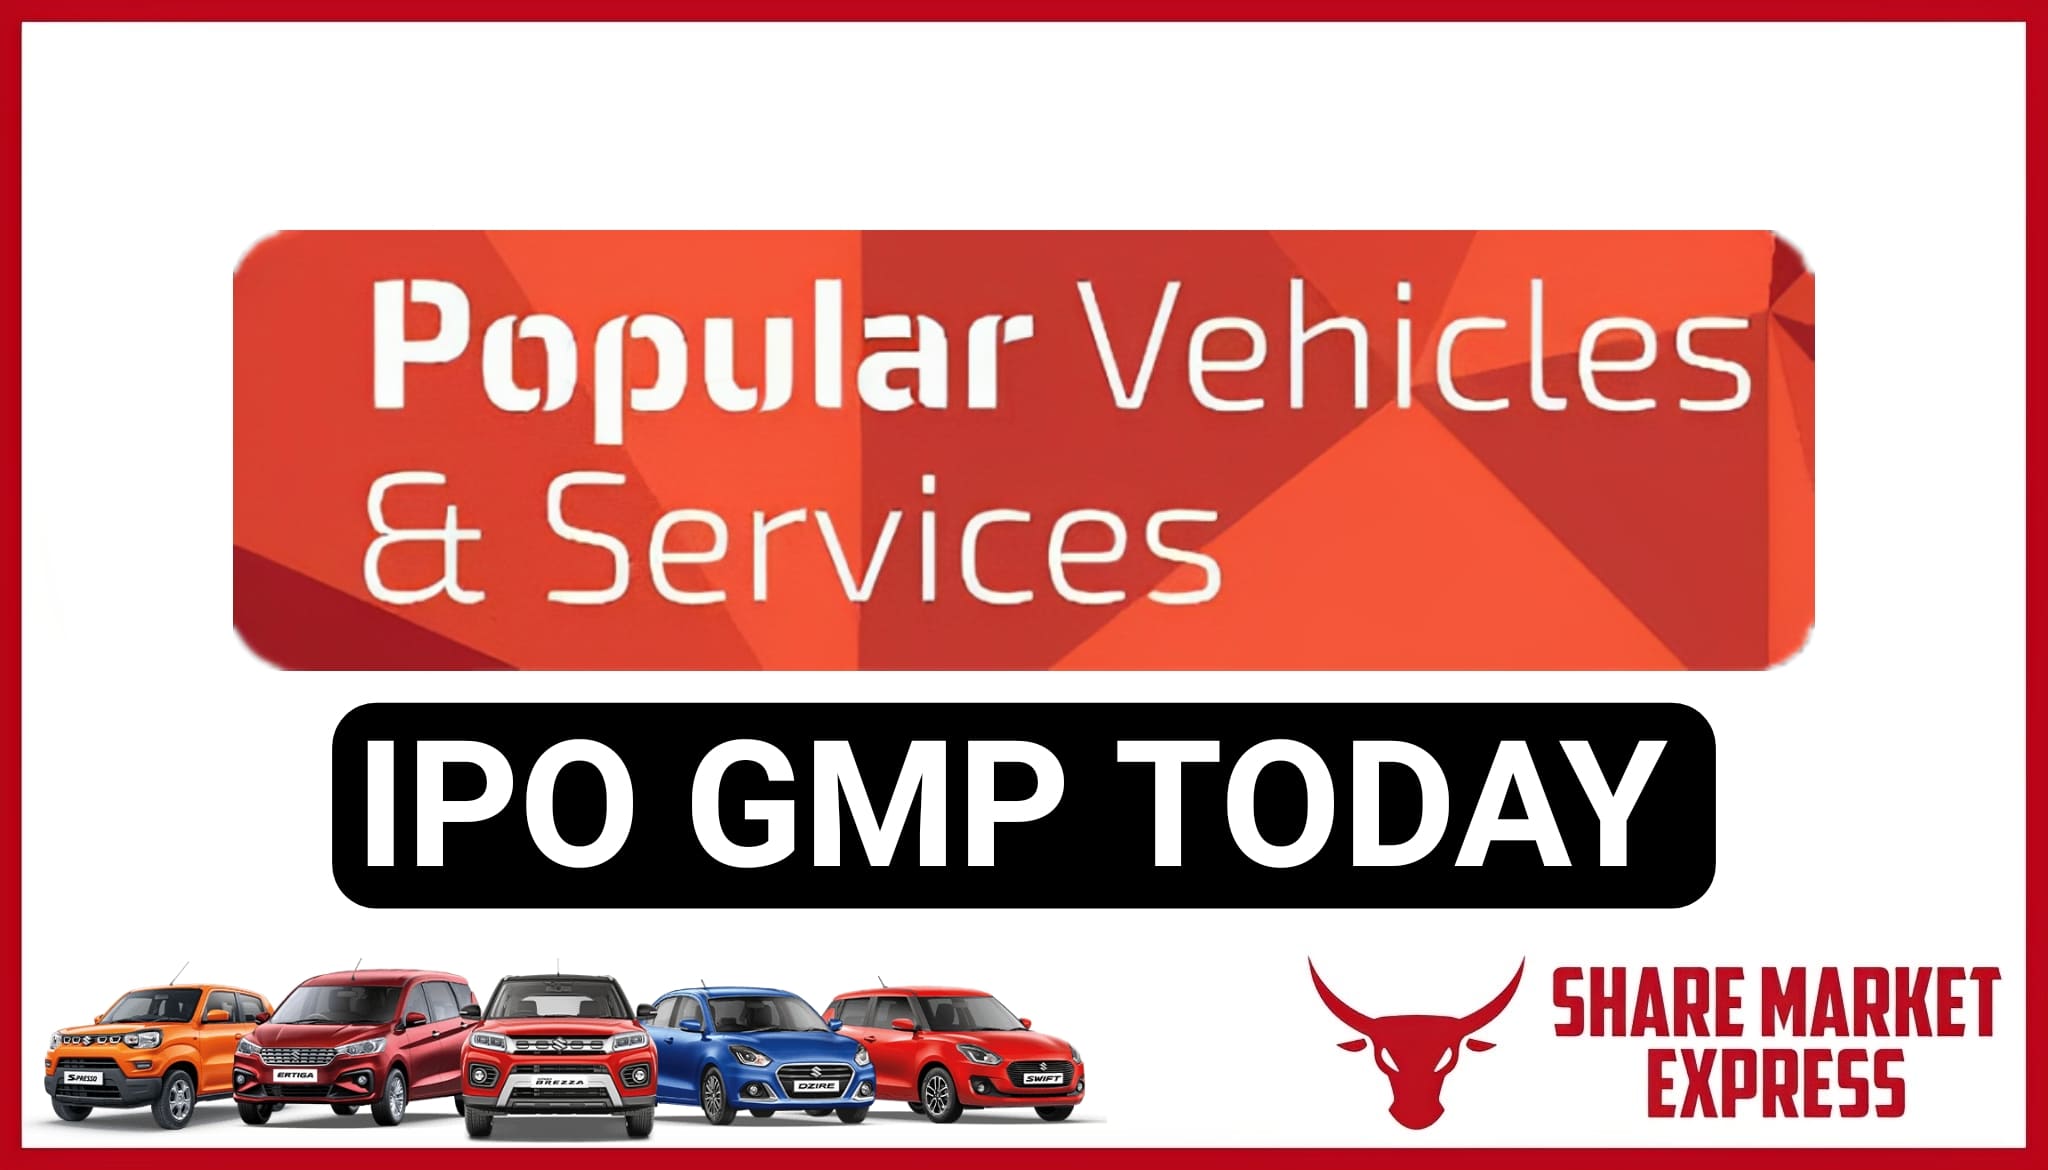 Popular Vehicles and Services IPO GMP Today